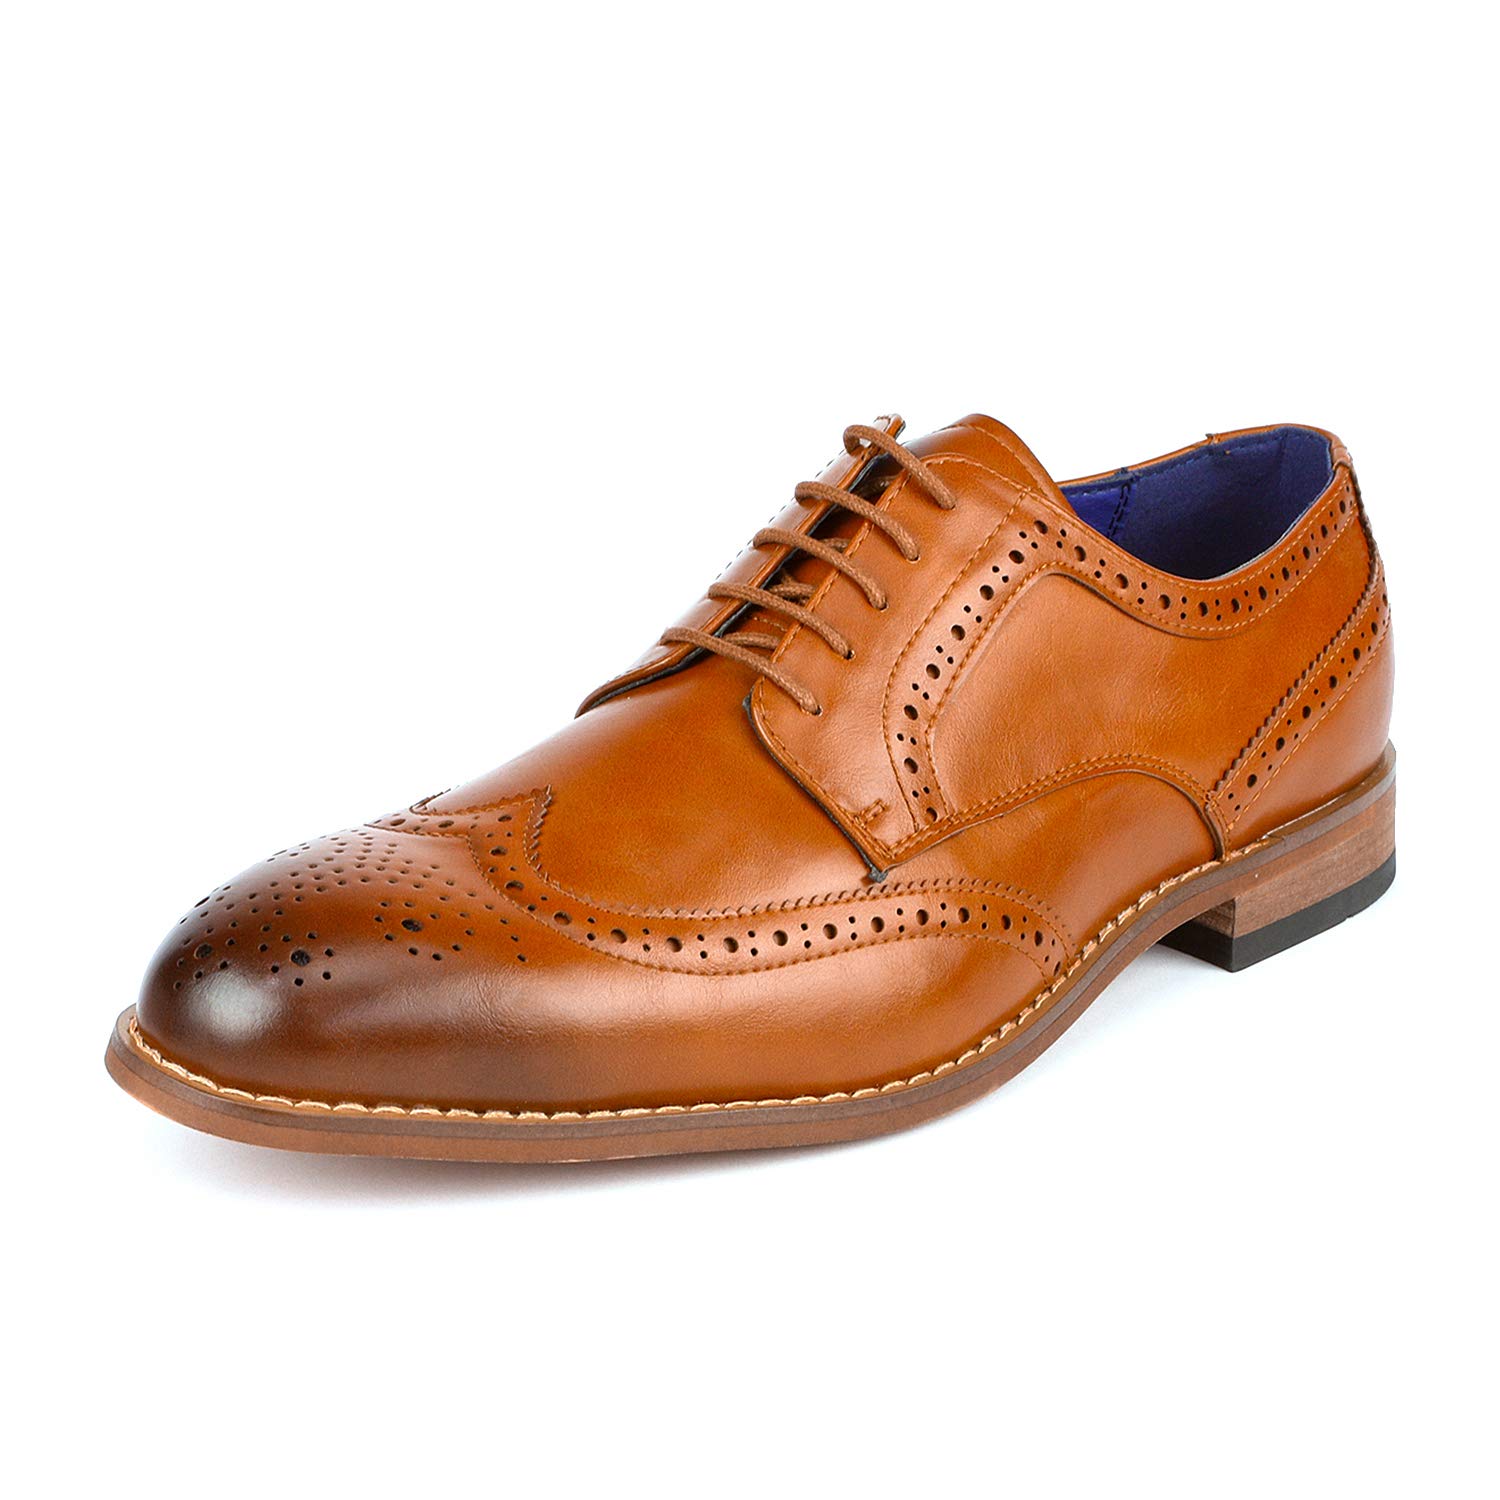 Bruno Marc Mens Brogue Oxford Shoes Lace up Wing Tip Dress Shoes Casual Shoes WILLIAM_2 CAMEL Size 7 - image 1 of 5